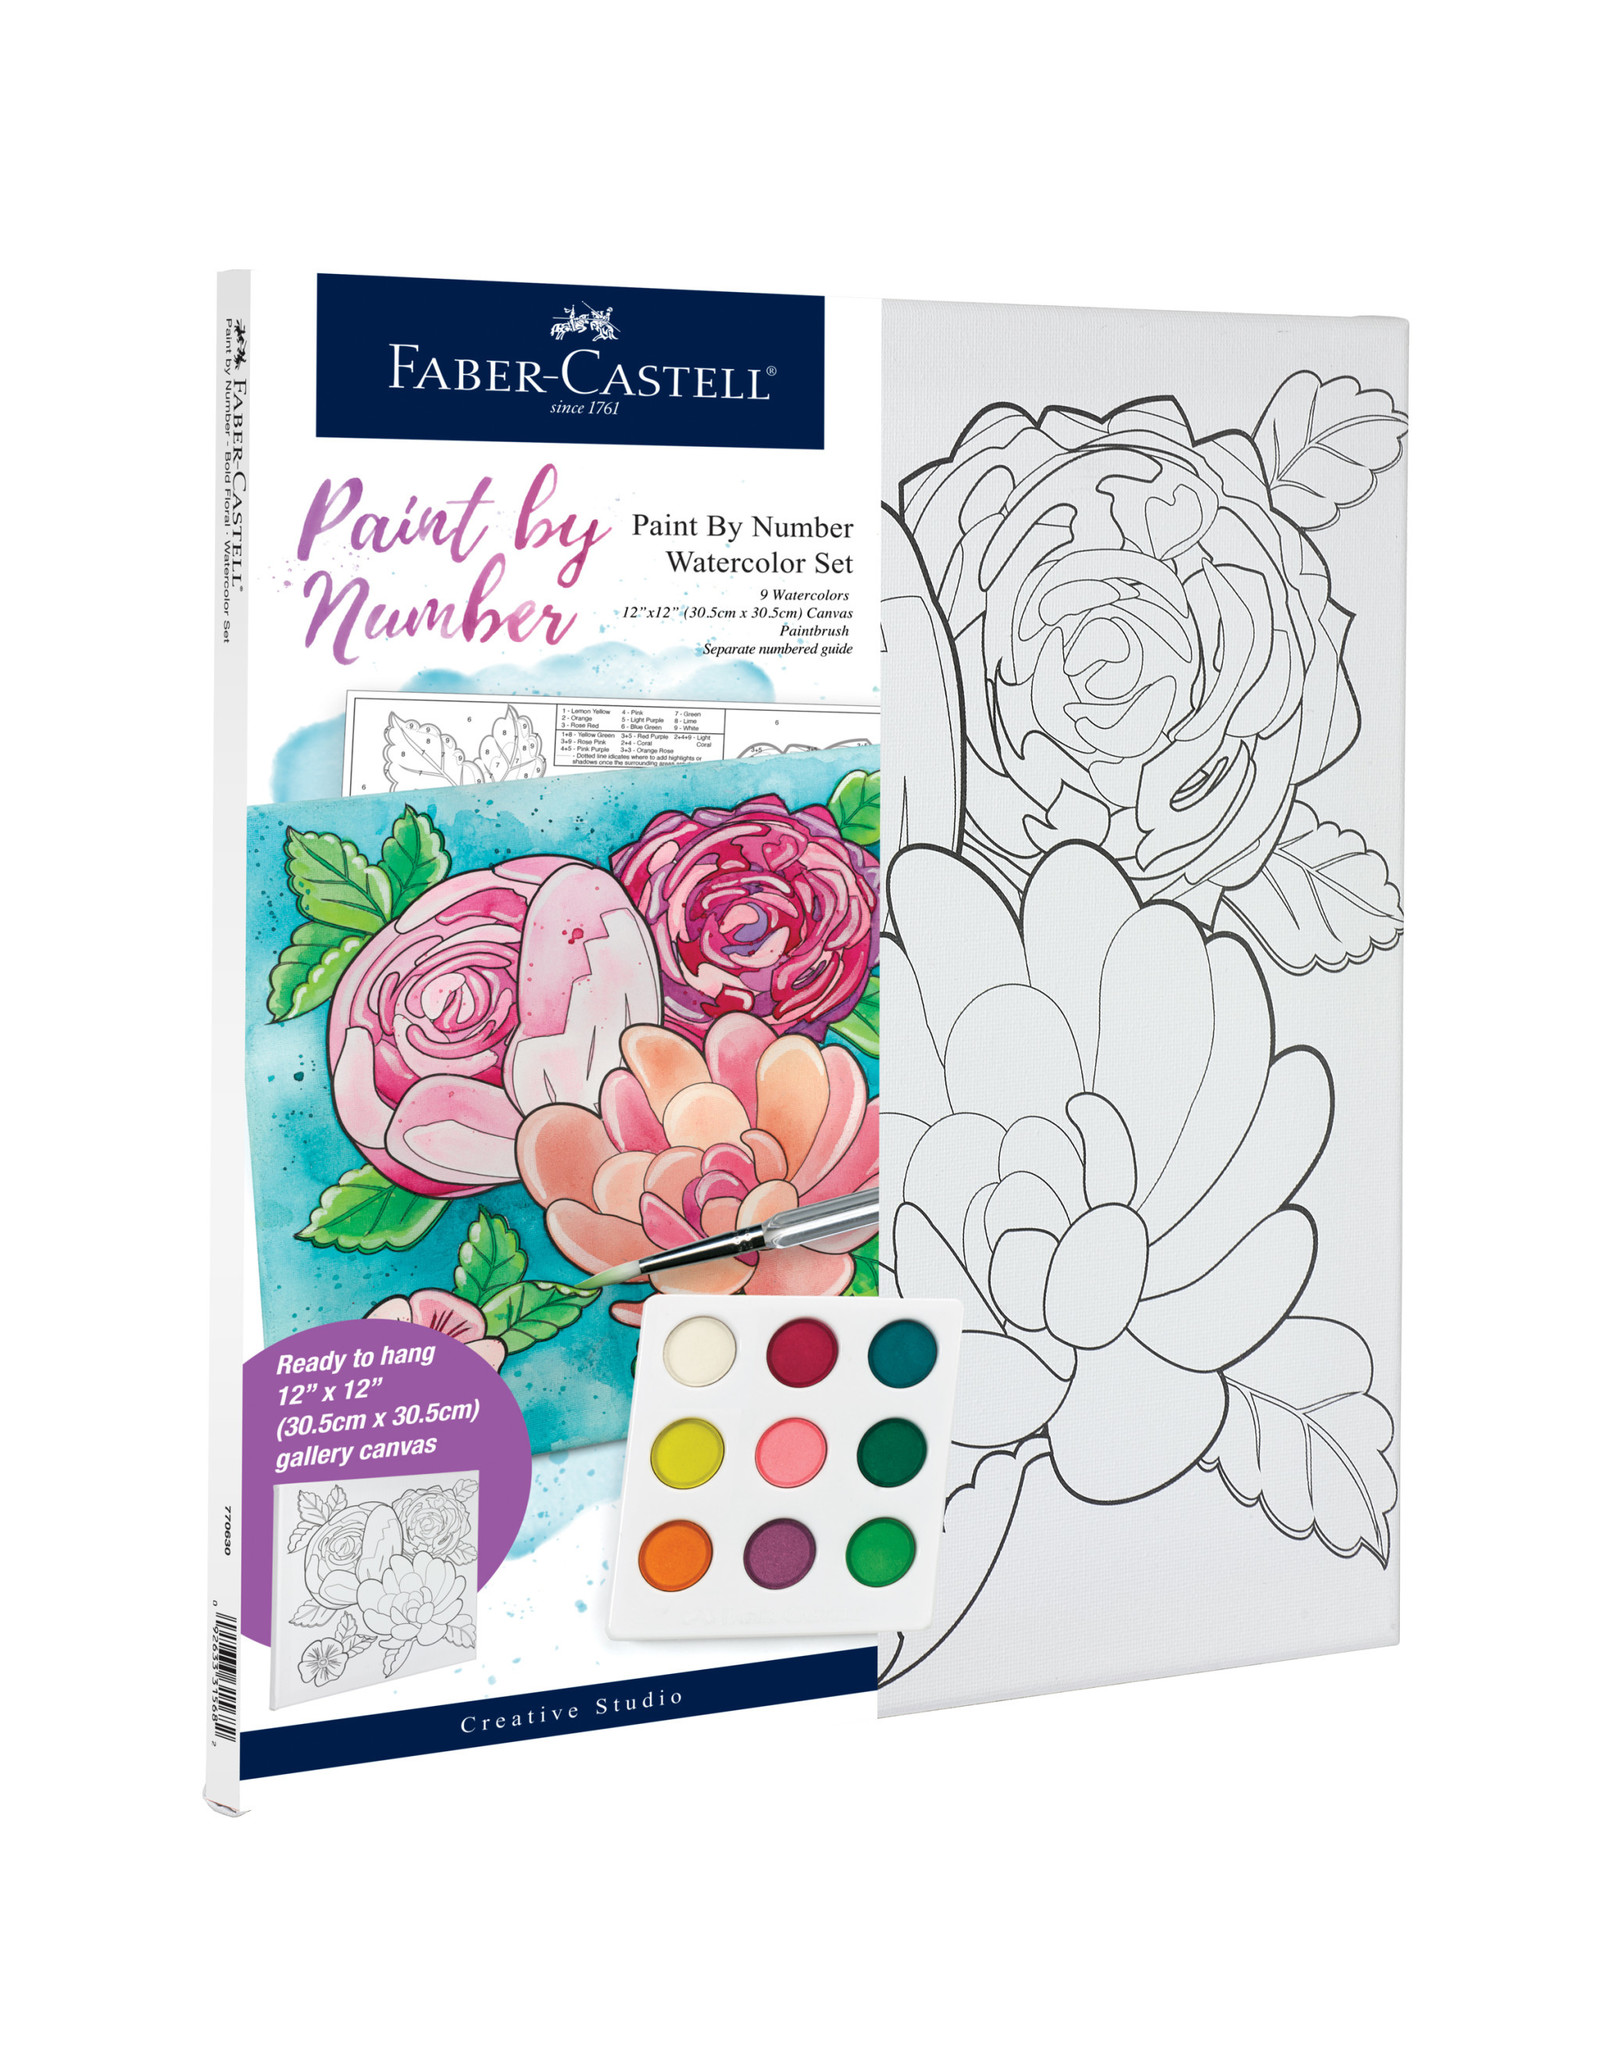 FABER-CASTELL Paint by Number, Bold Floral